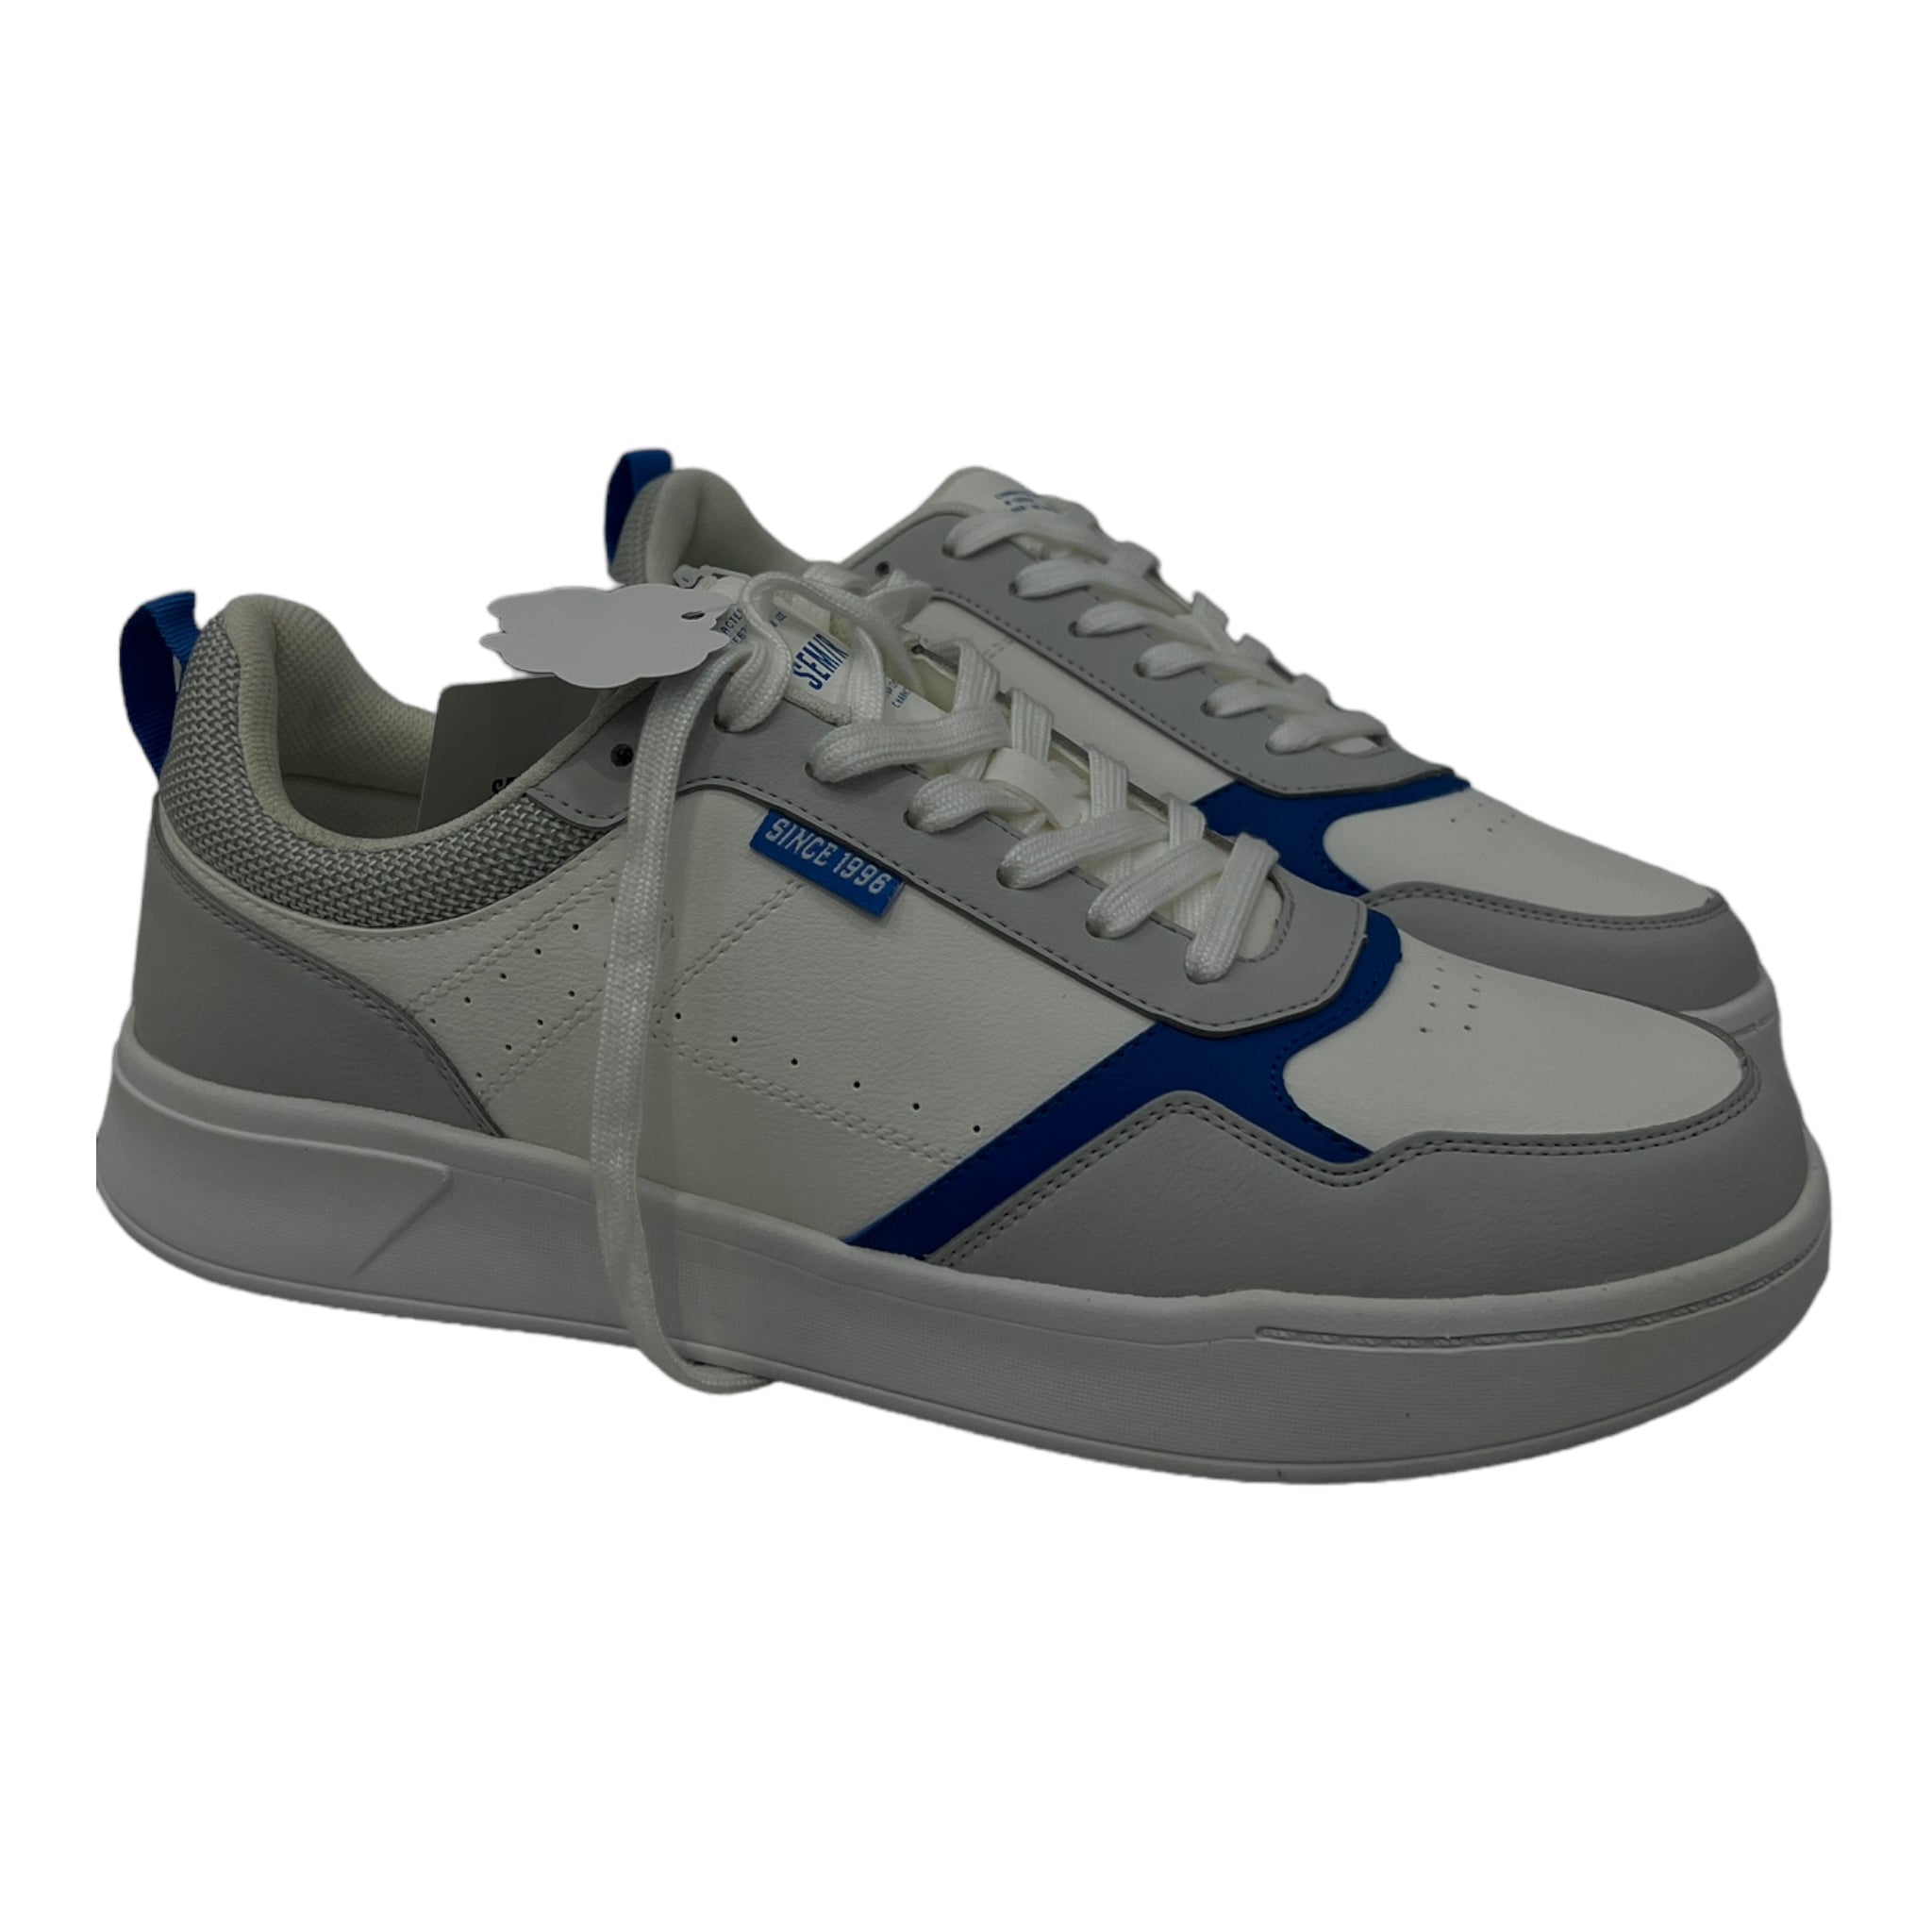 SEMIR UNISEX SNEAKERS WITH BLUE TAPPINGS IN LIGHT GREY